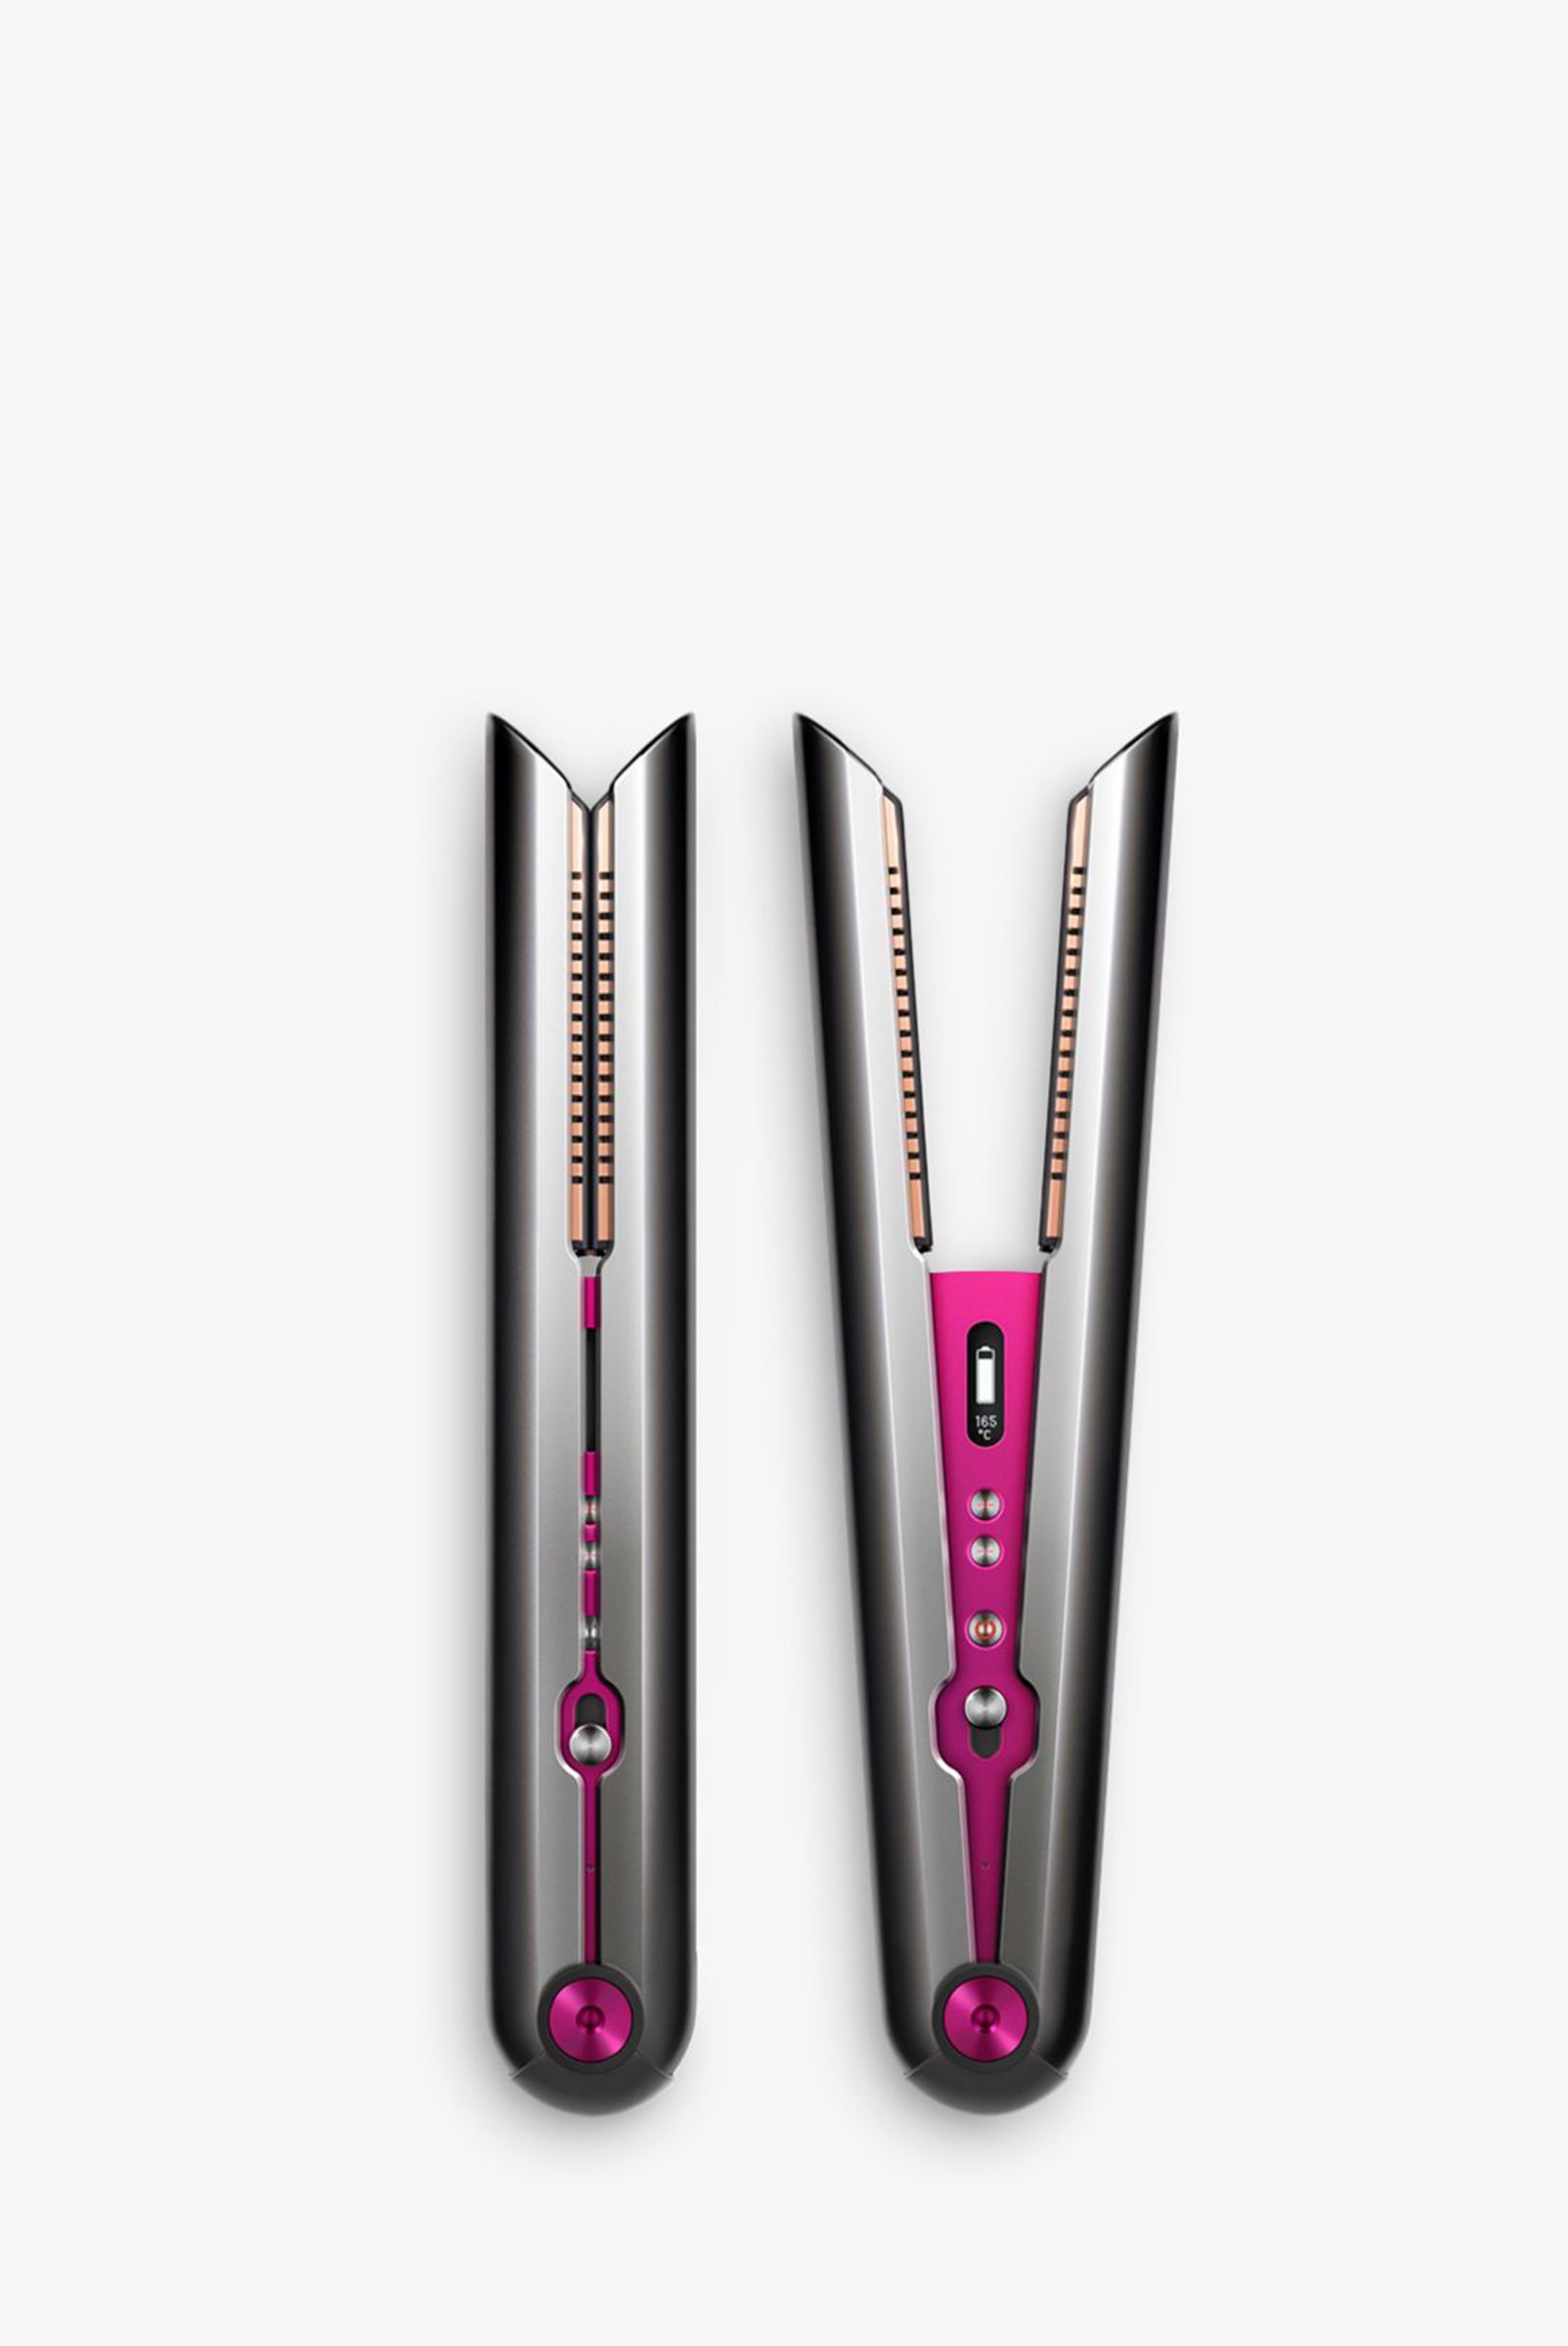 Dyson Corrale™ Cord-Free Hair Straighteners, £399